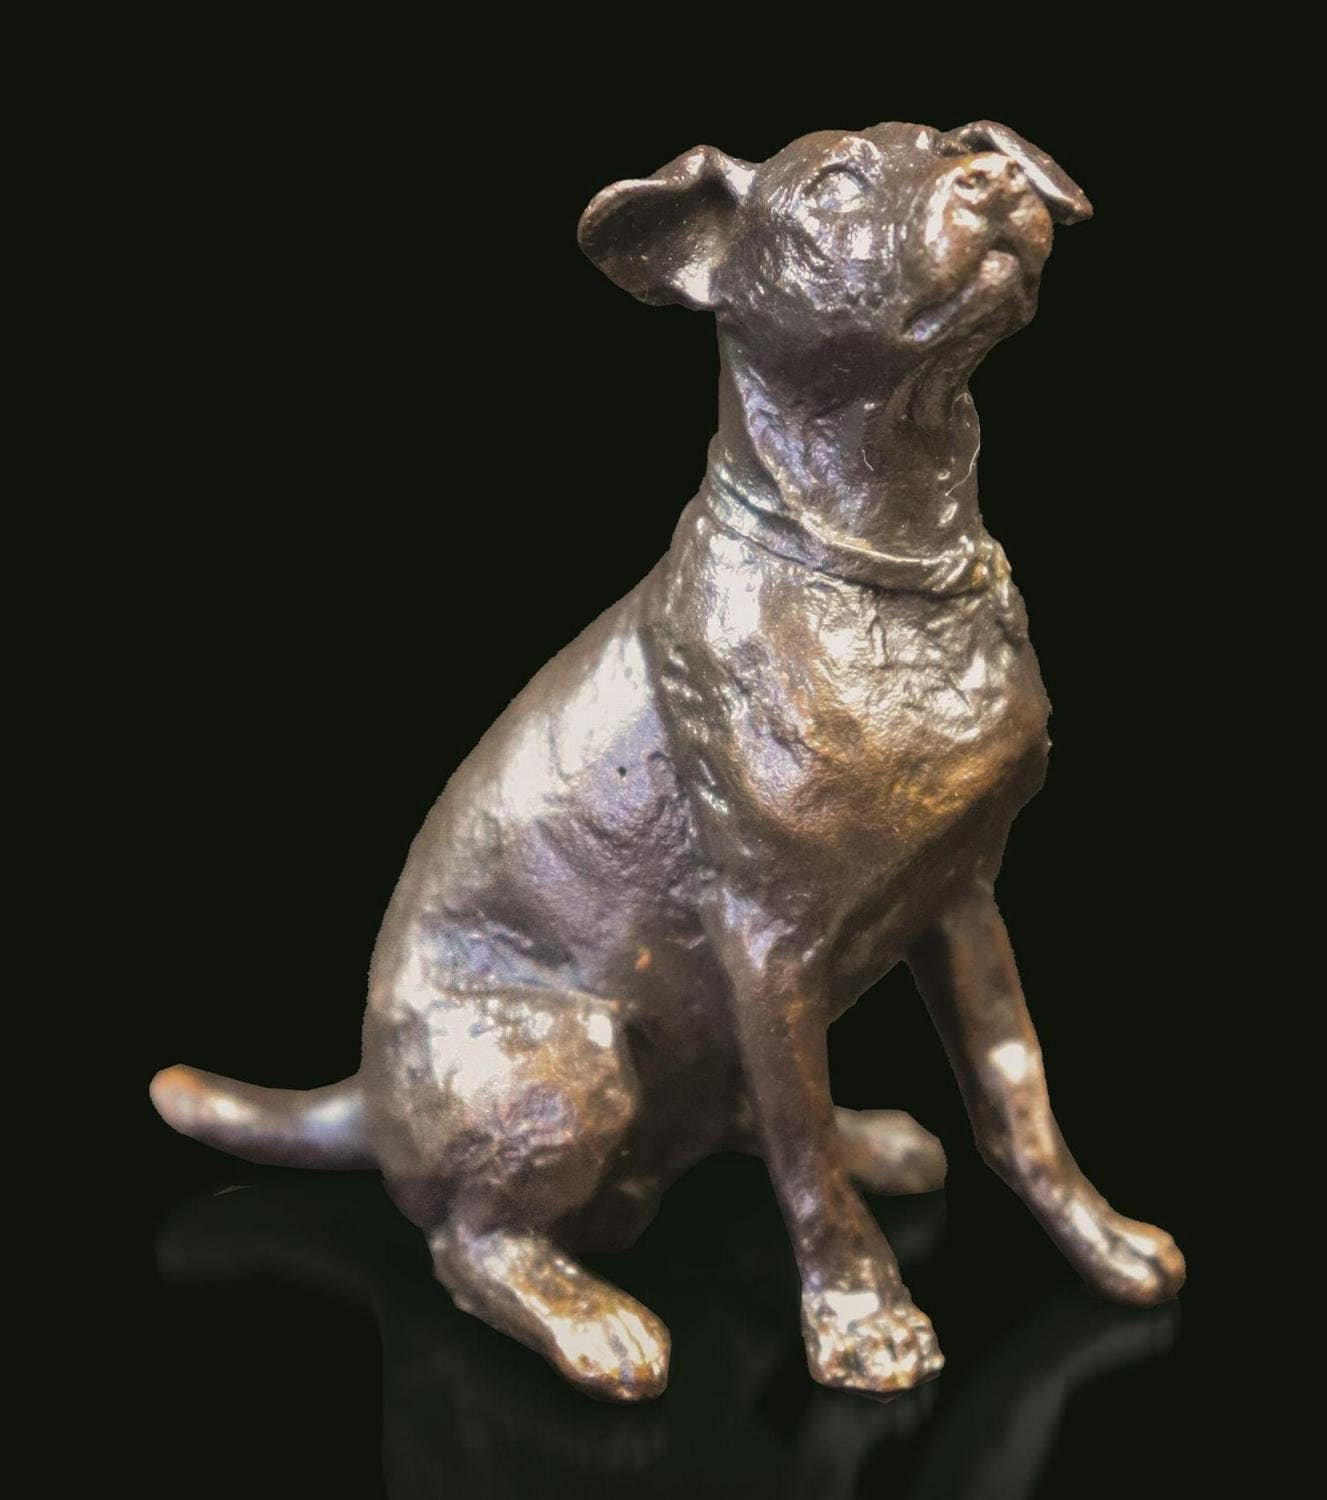 Jack russell small bronze figurine (limited edition) michael simpson dog sculpture home decor